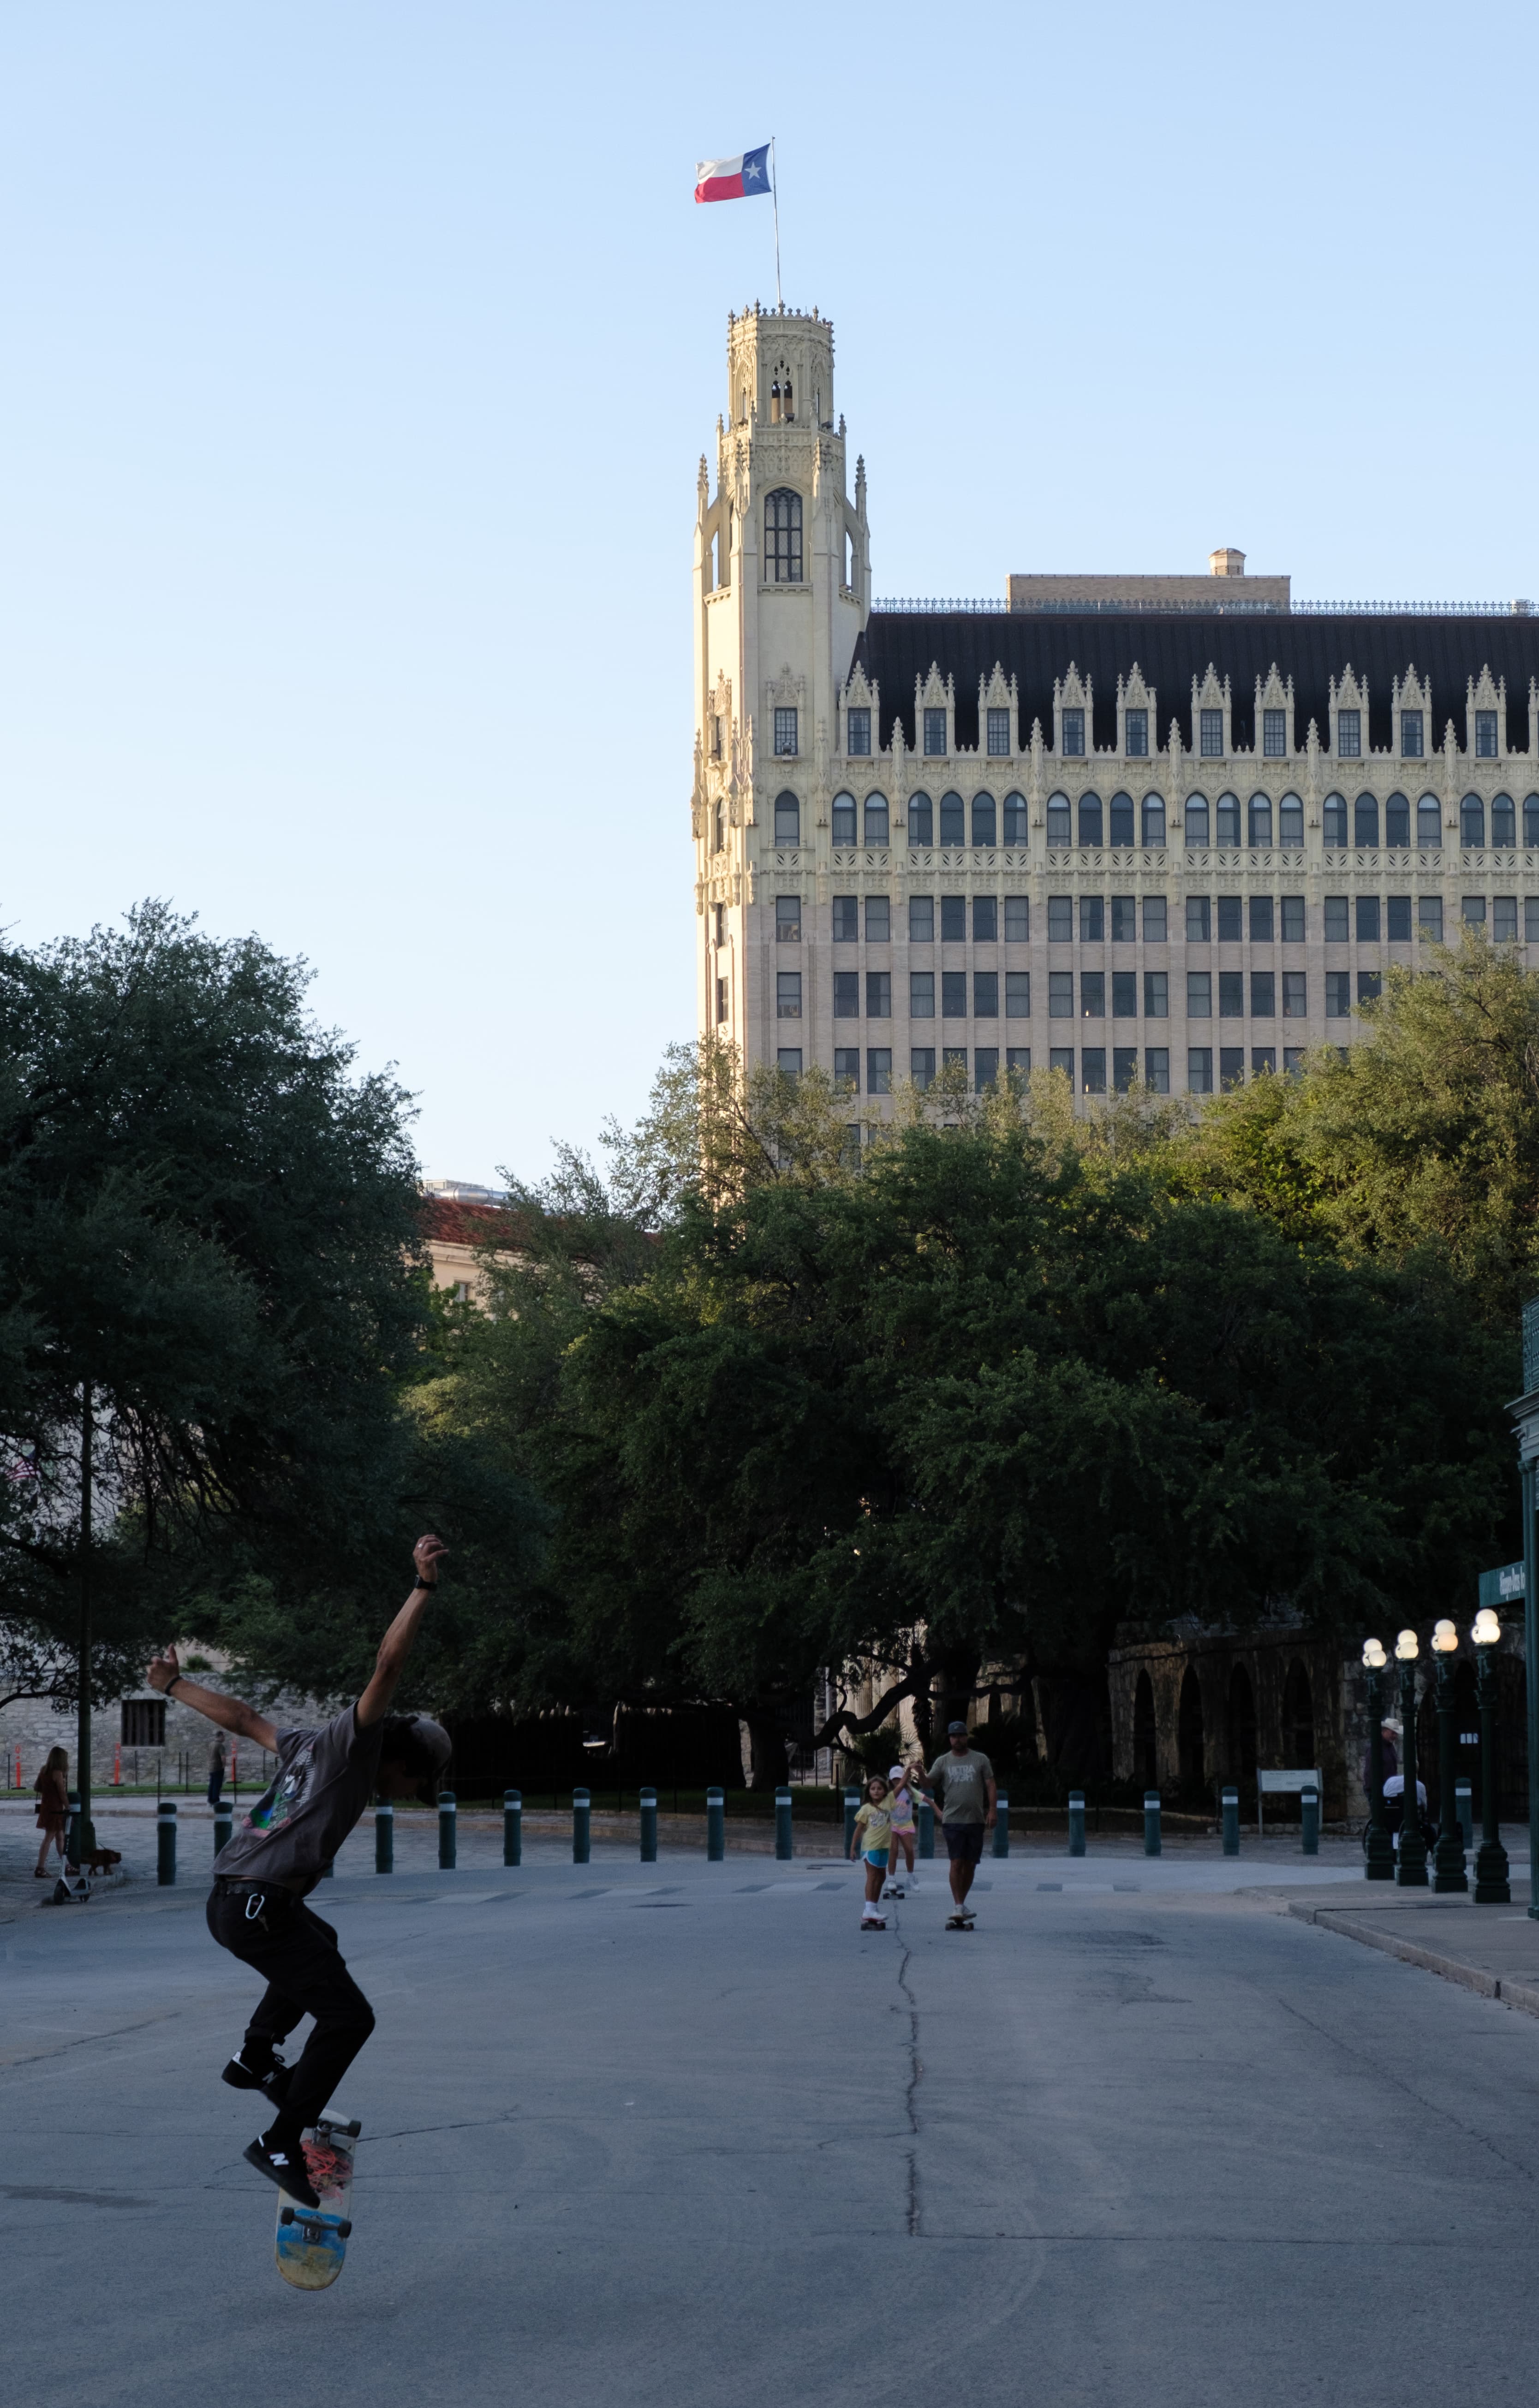 Skater in front of the Alamo and the Emily Morgan Hotel (Fujifilm X-S10, 18-55mm)